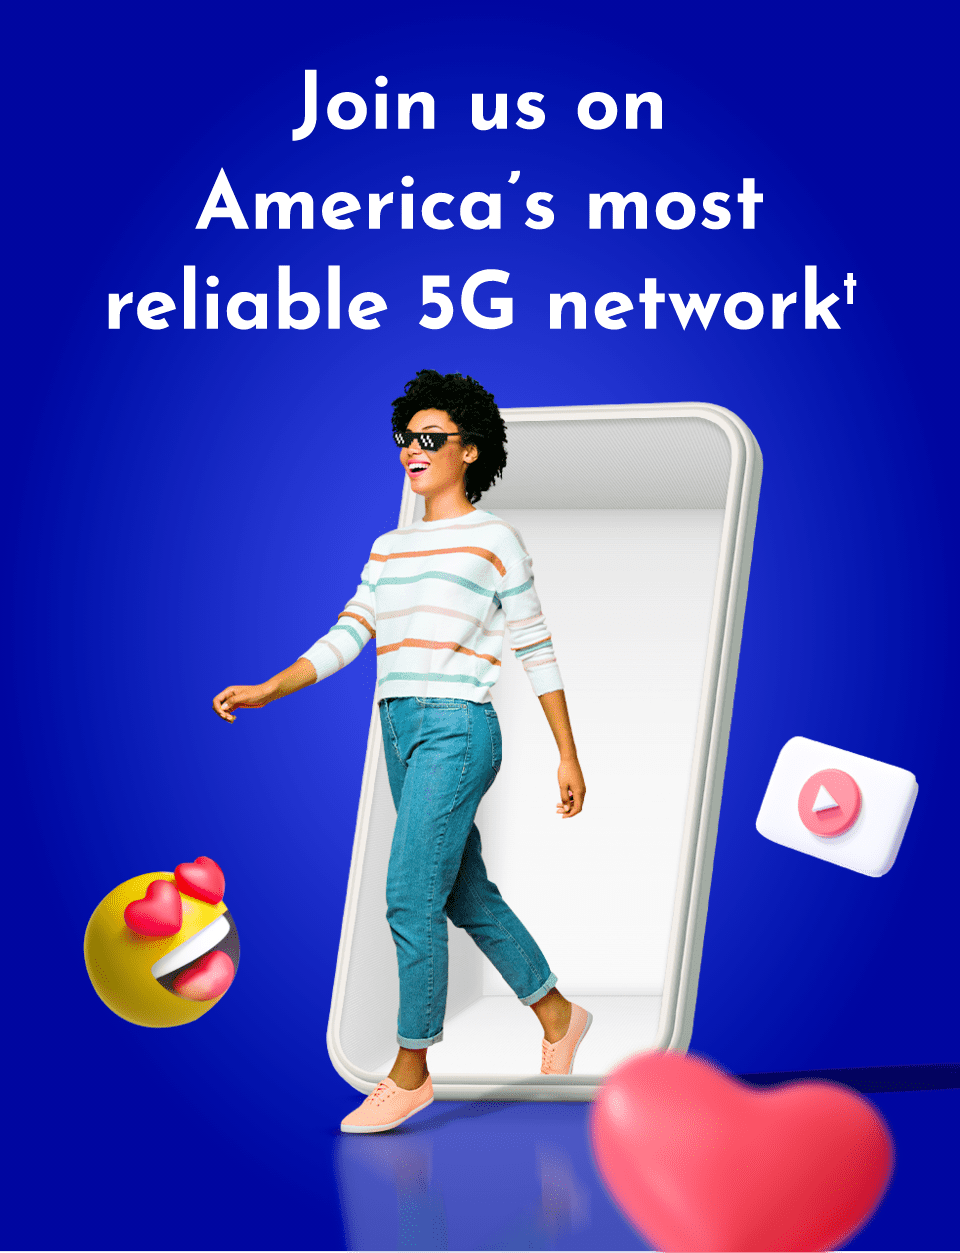 the most reliable network in America